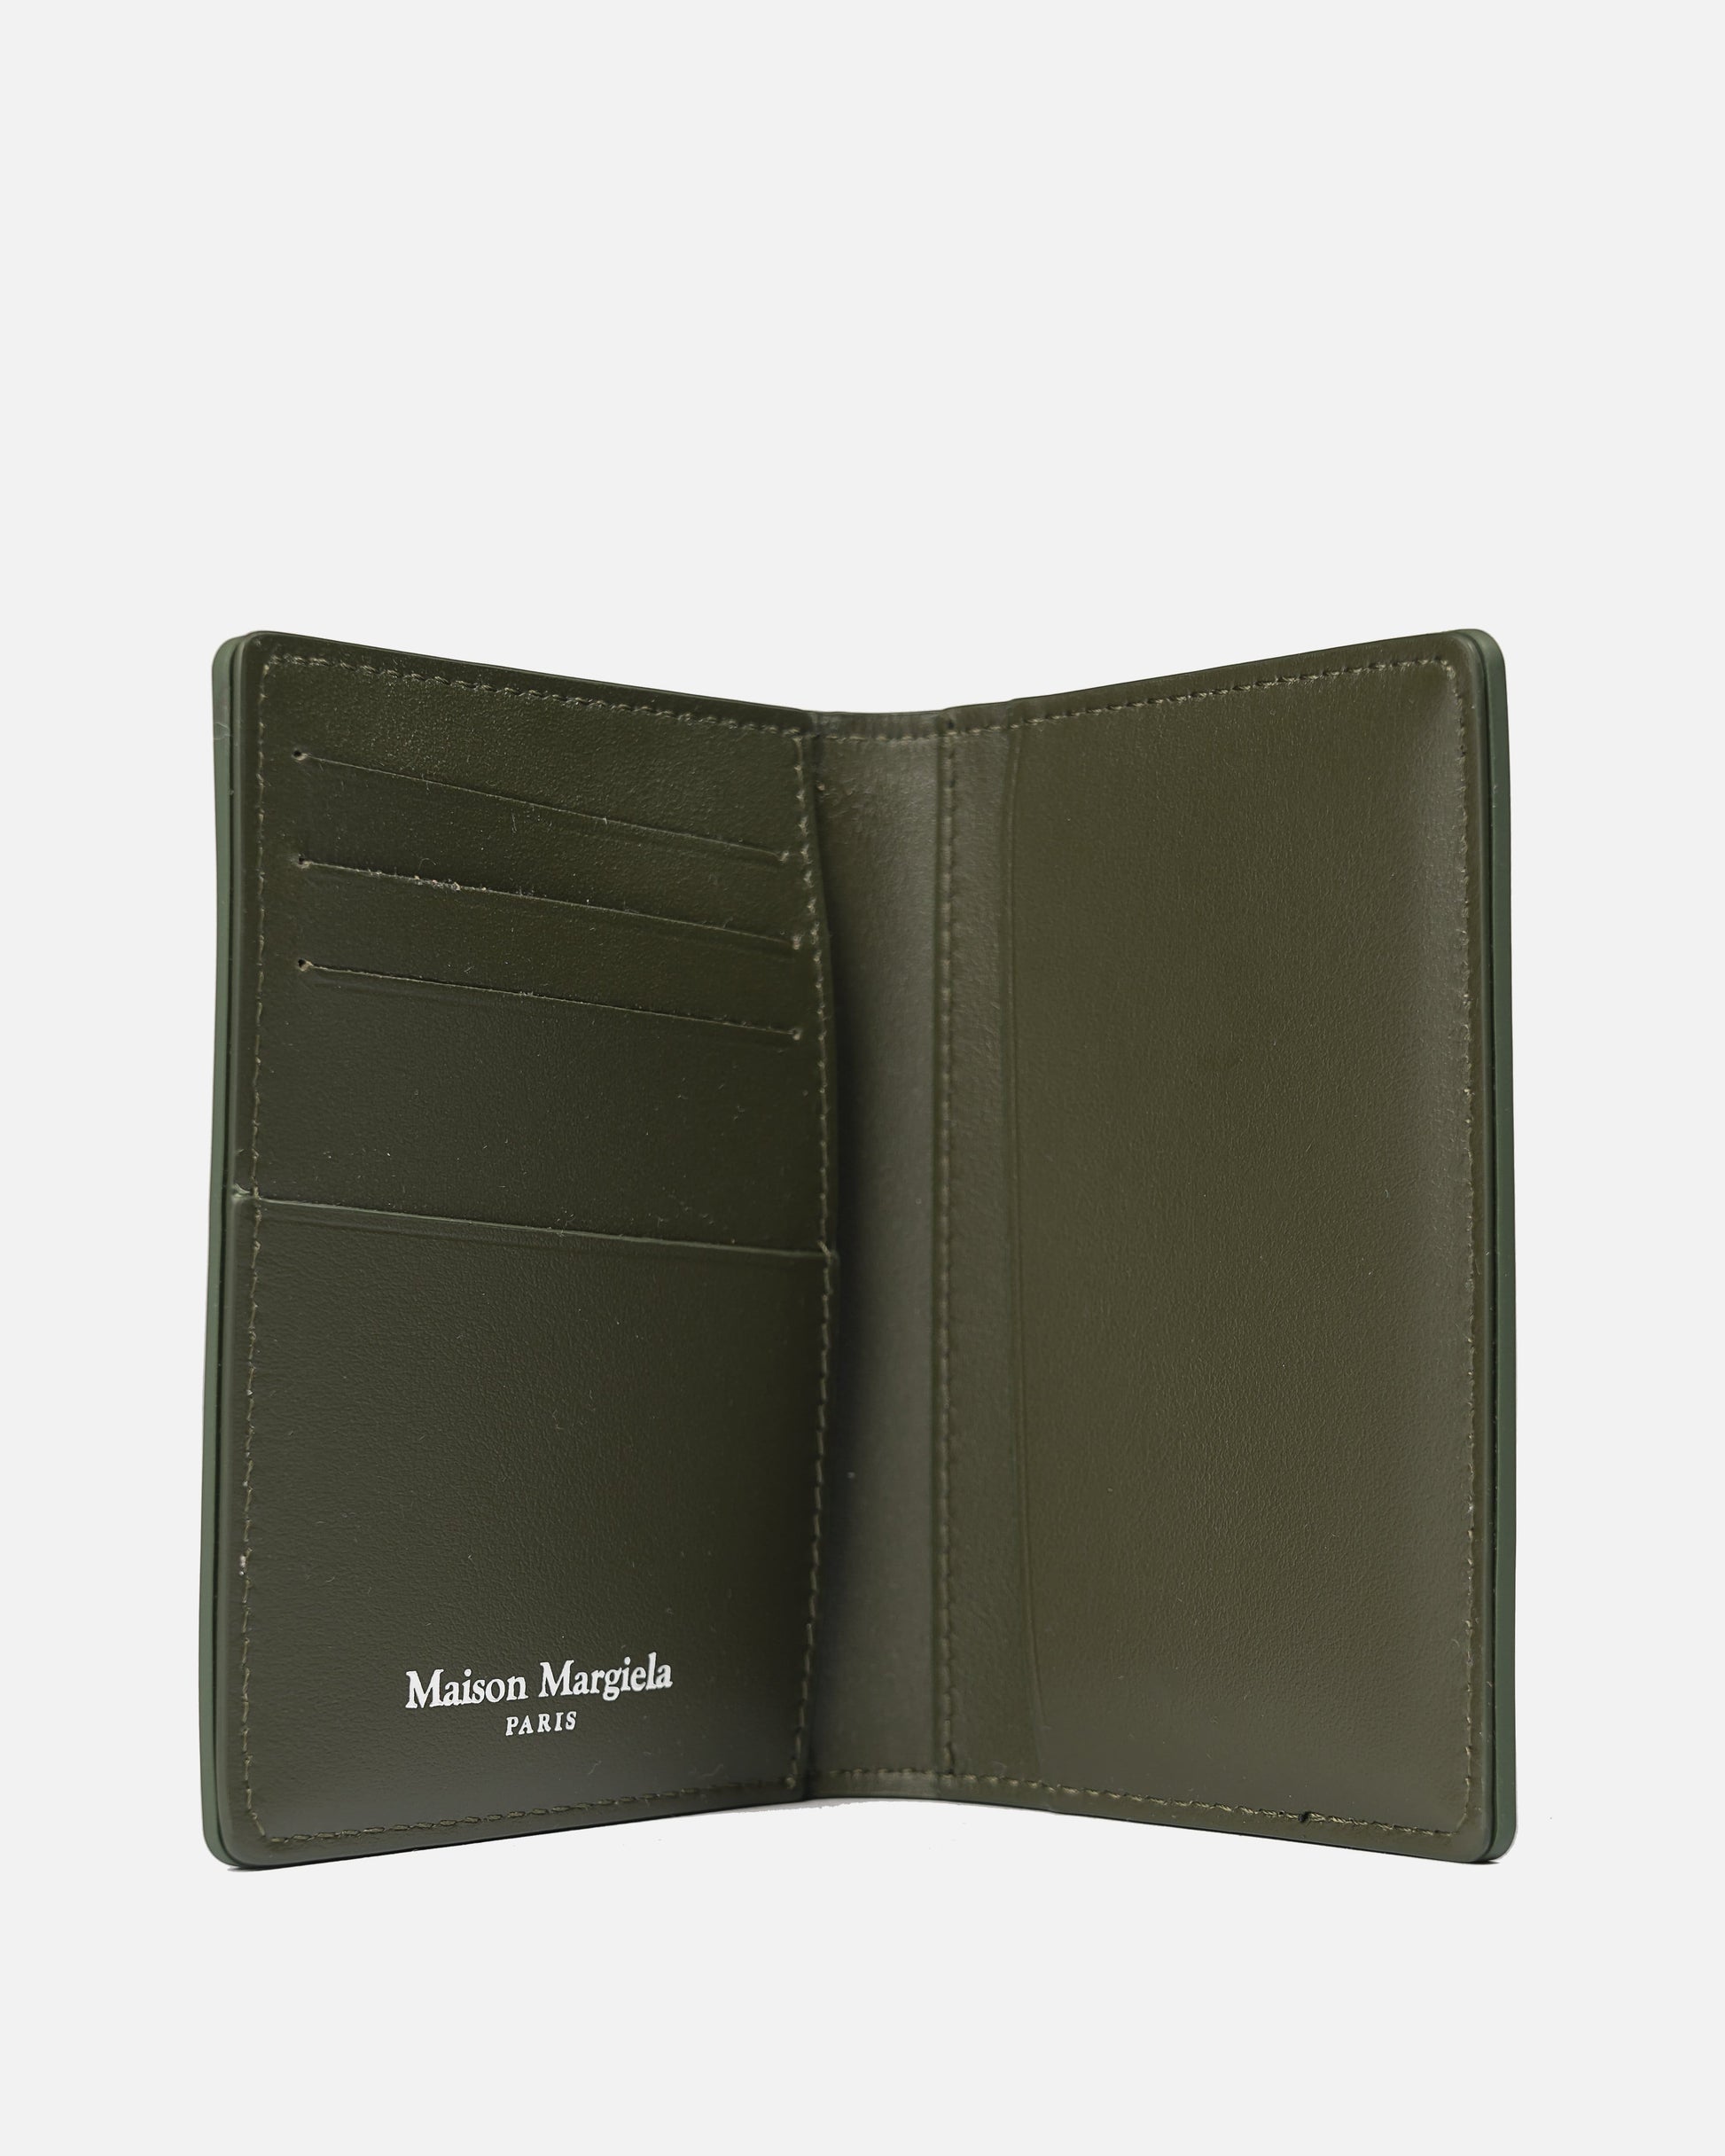 Maison Margiela Leather Goods Rubberized Fold Card Holder in Thyme